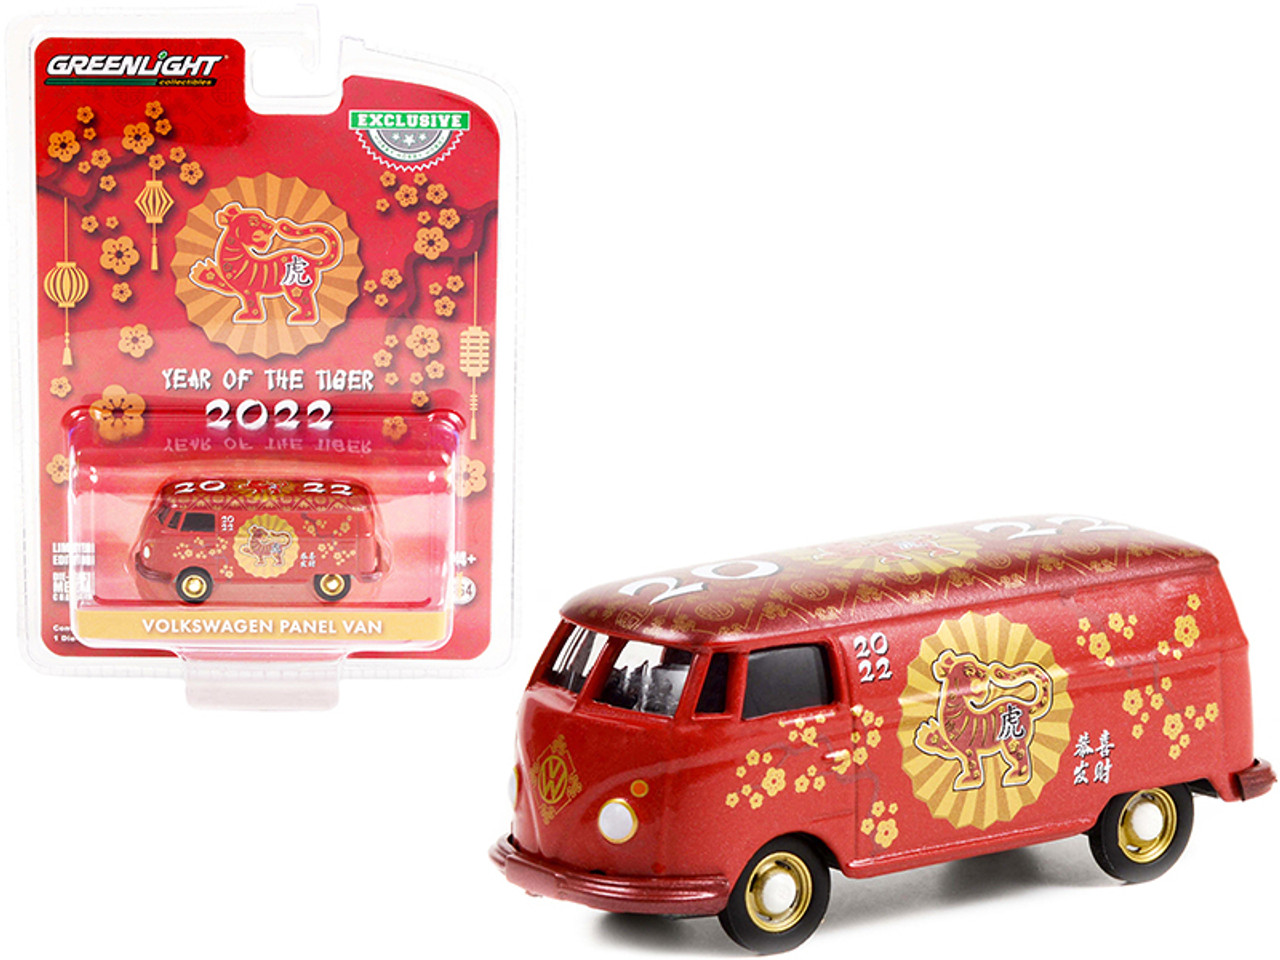 Volkswagen Panel Van "Chinese Zodiac - 2022 Year of the Tiger" "Hobby Exclusive" 1/64 Diecast Model Car by Greenlight